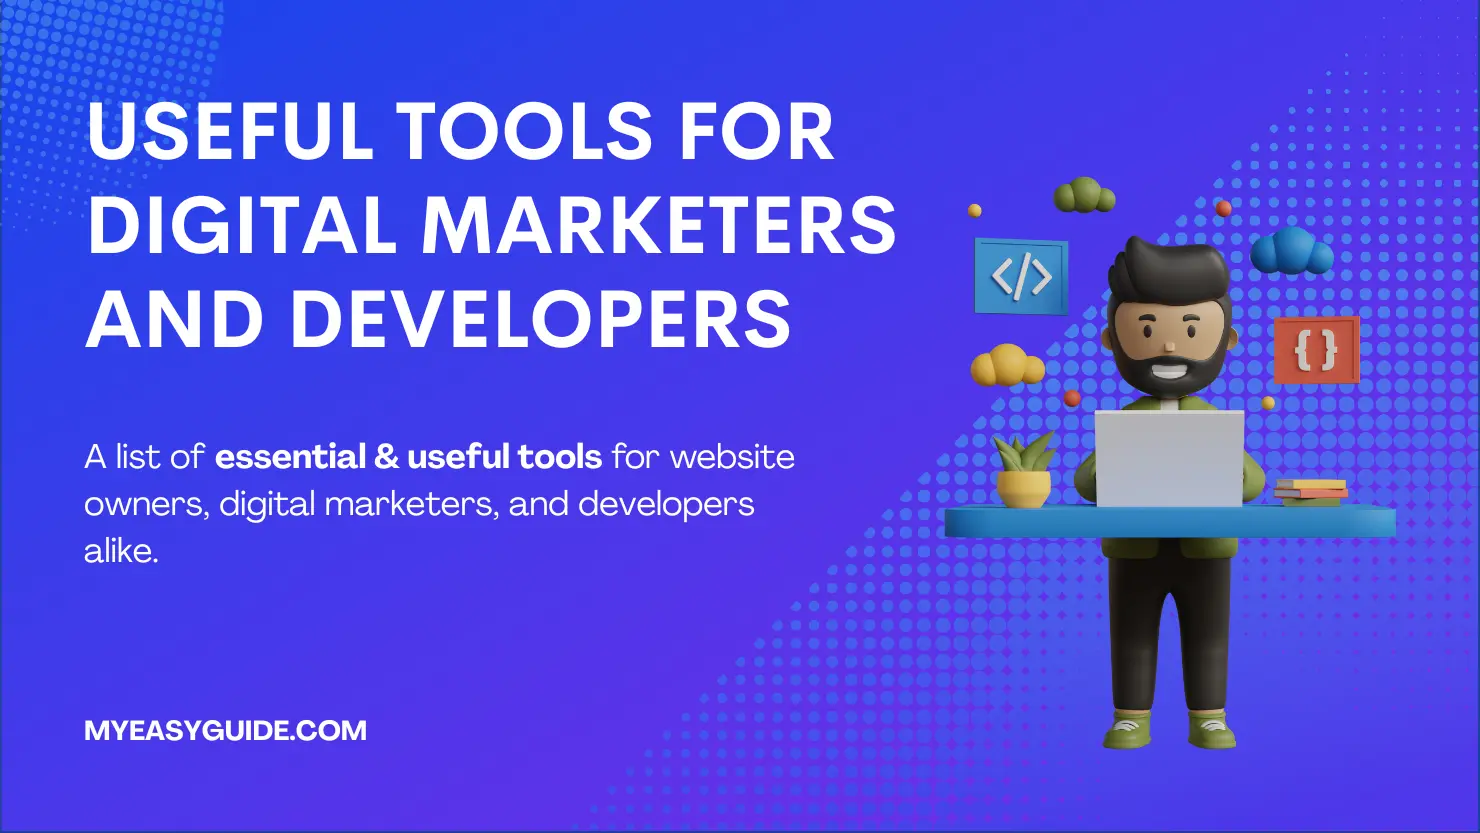 Useful tools for digital marketers and developers